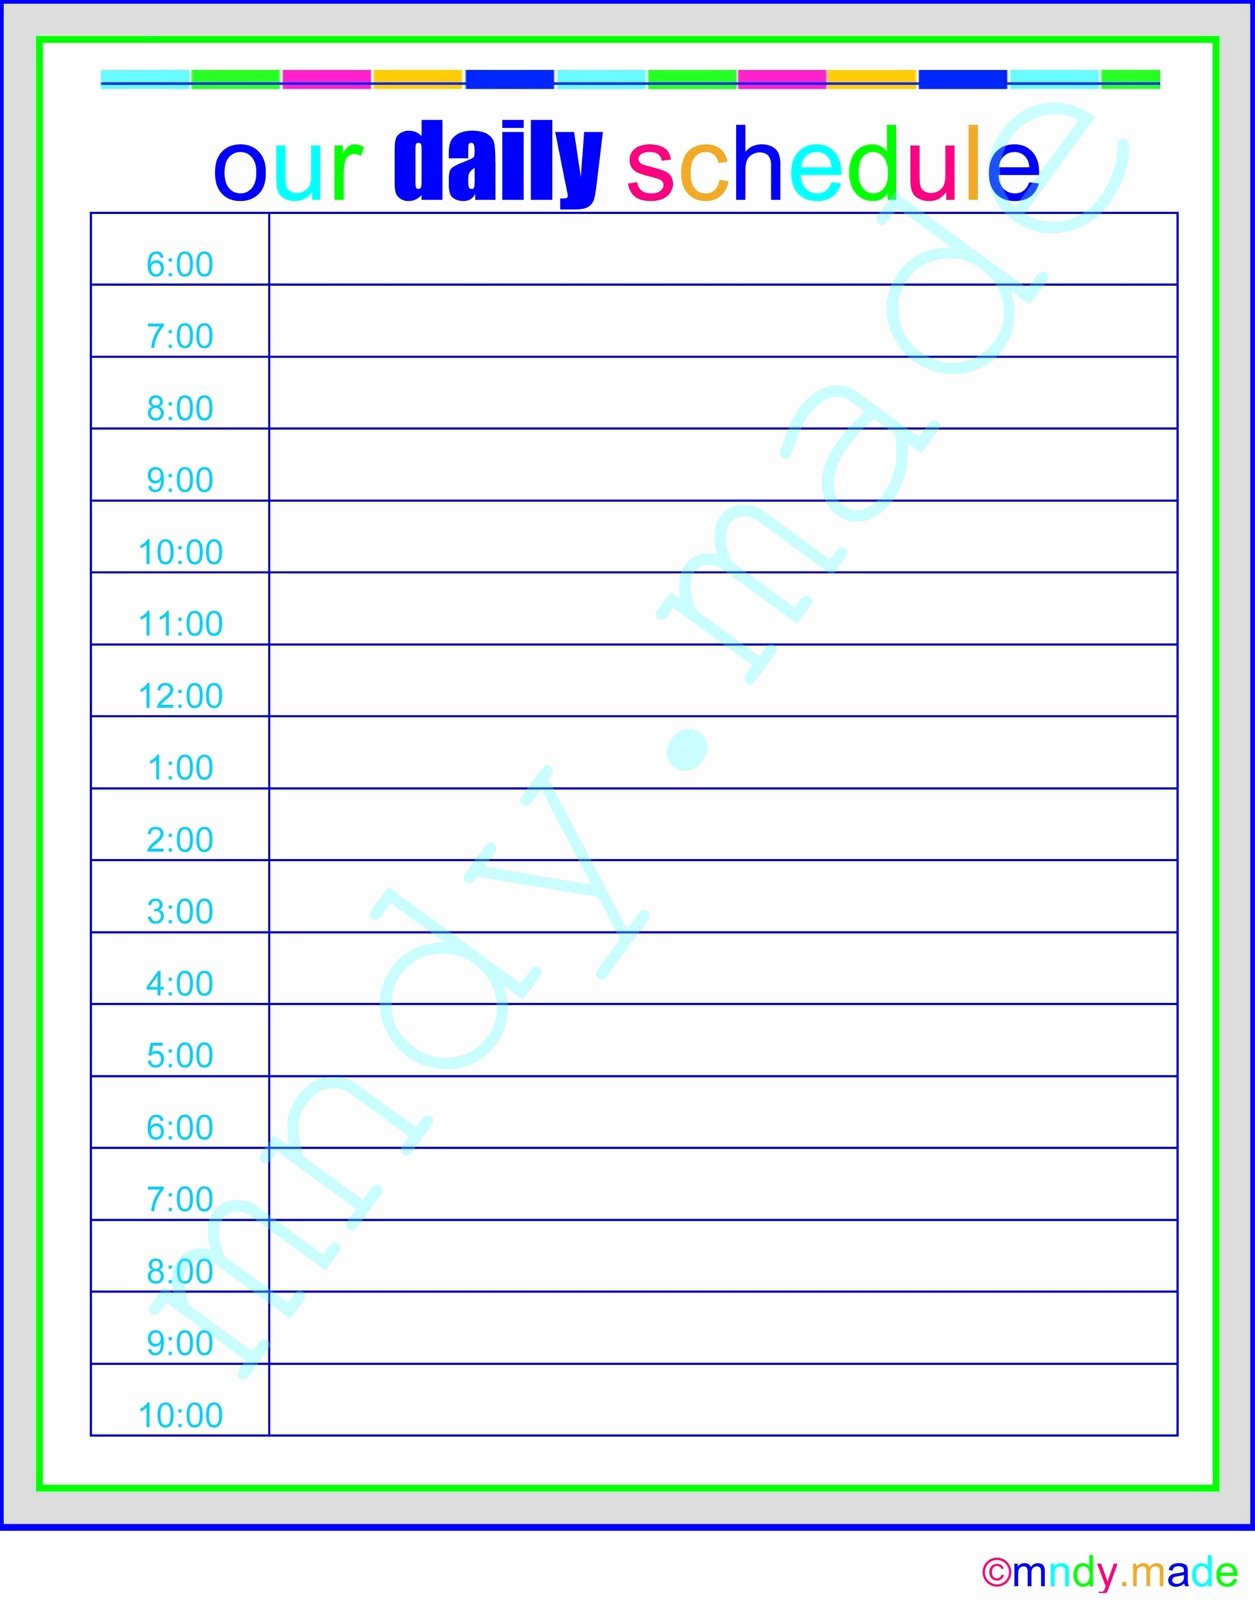 Baby Daily Schedule Template Beautiful Search Results for “printable Daily Hourly Schedule